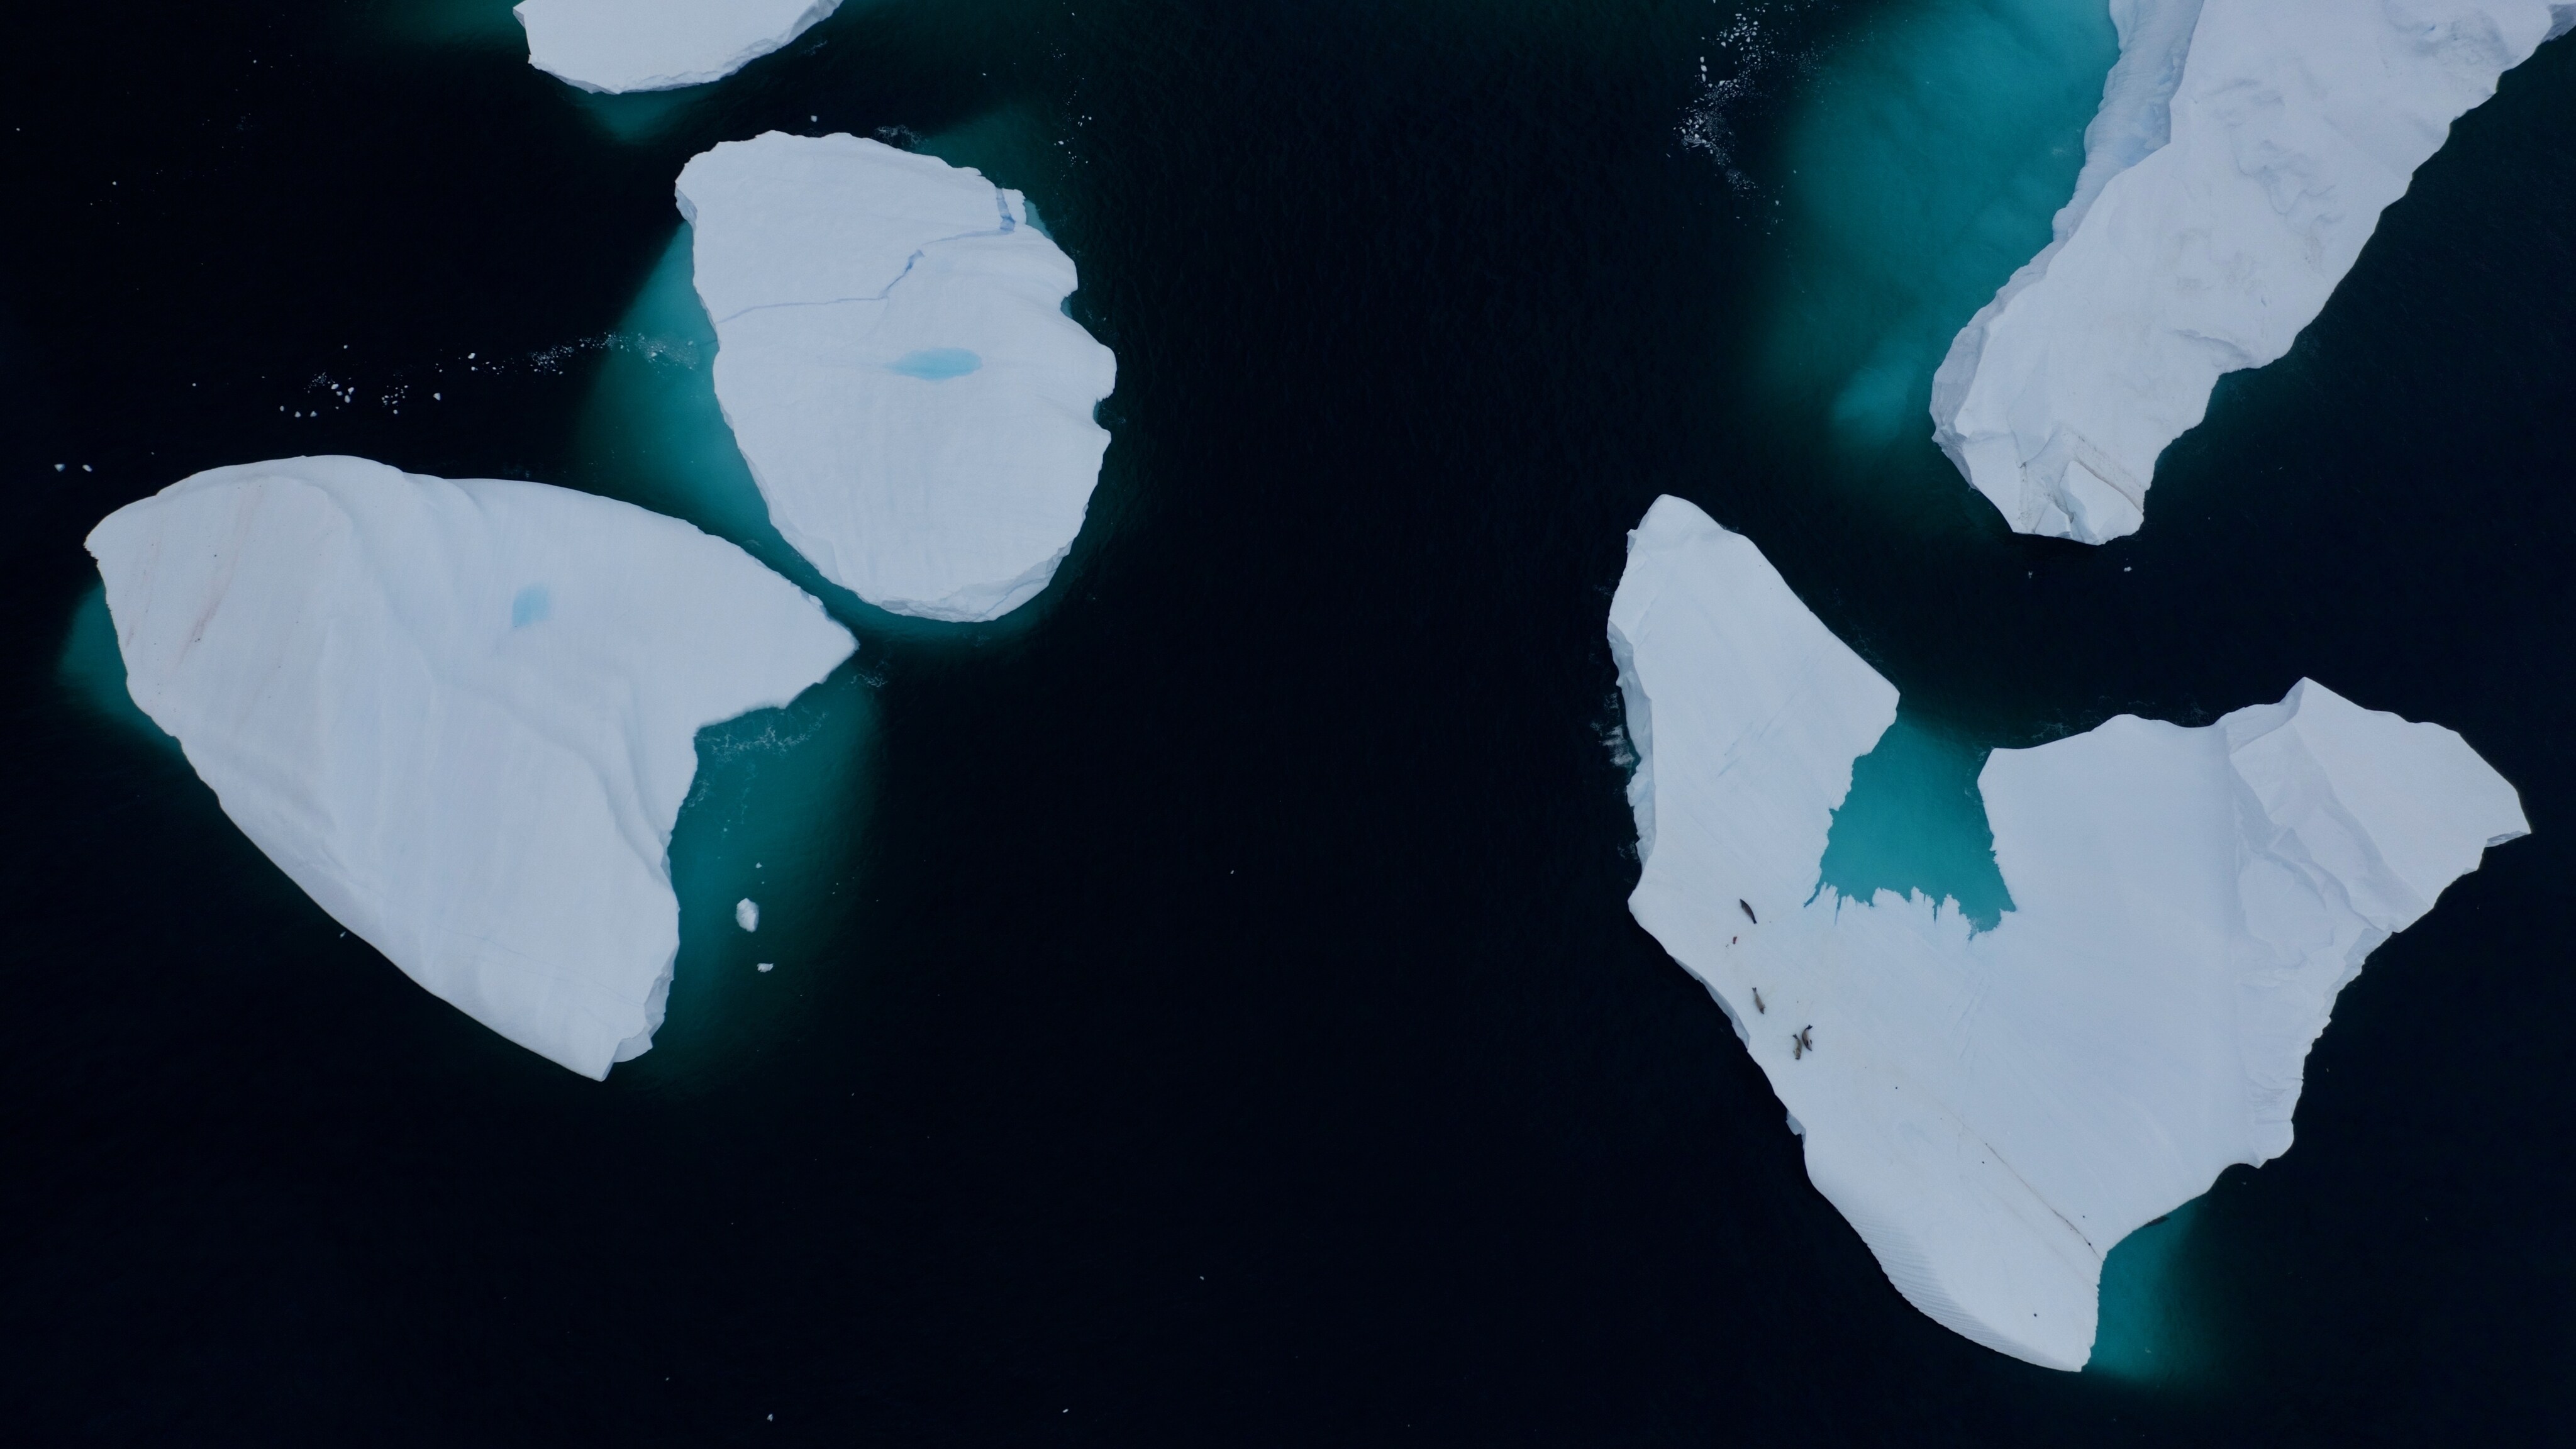 Antarctic sea ice. (National Geographic for Disney+/Hayes Baxley)